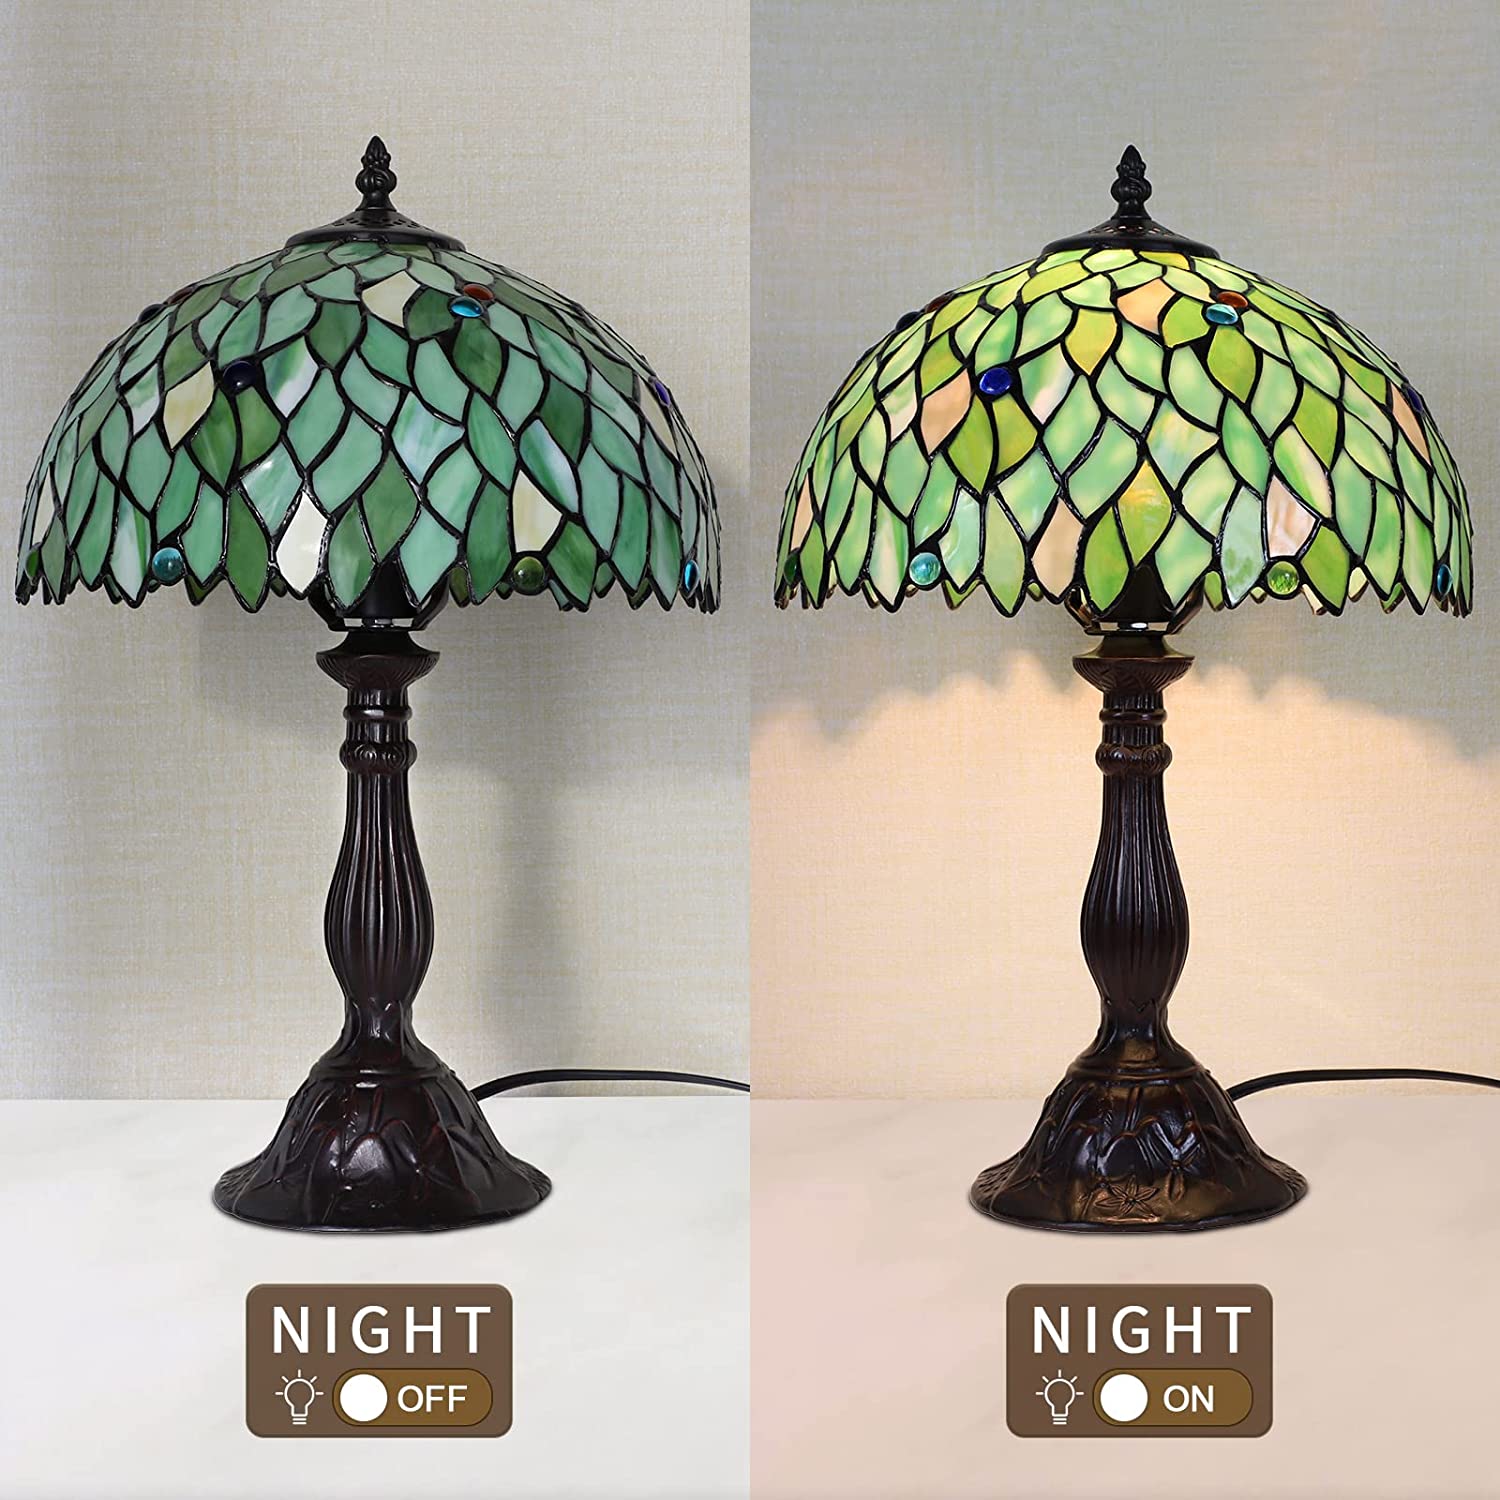 YELROL  Lamp Table Lamp Stained Glass Leaf Bedside Lamp Reading Desk Light for Bedroom Living Room Green 18\u201D Tall 1 PCS LED Bulb(2700K E26) Included Unique Gifts